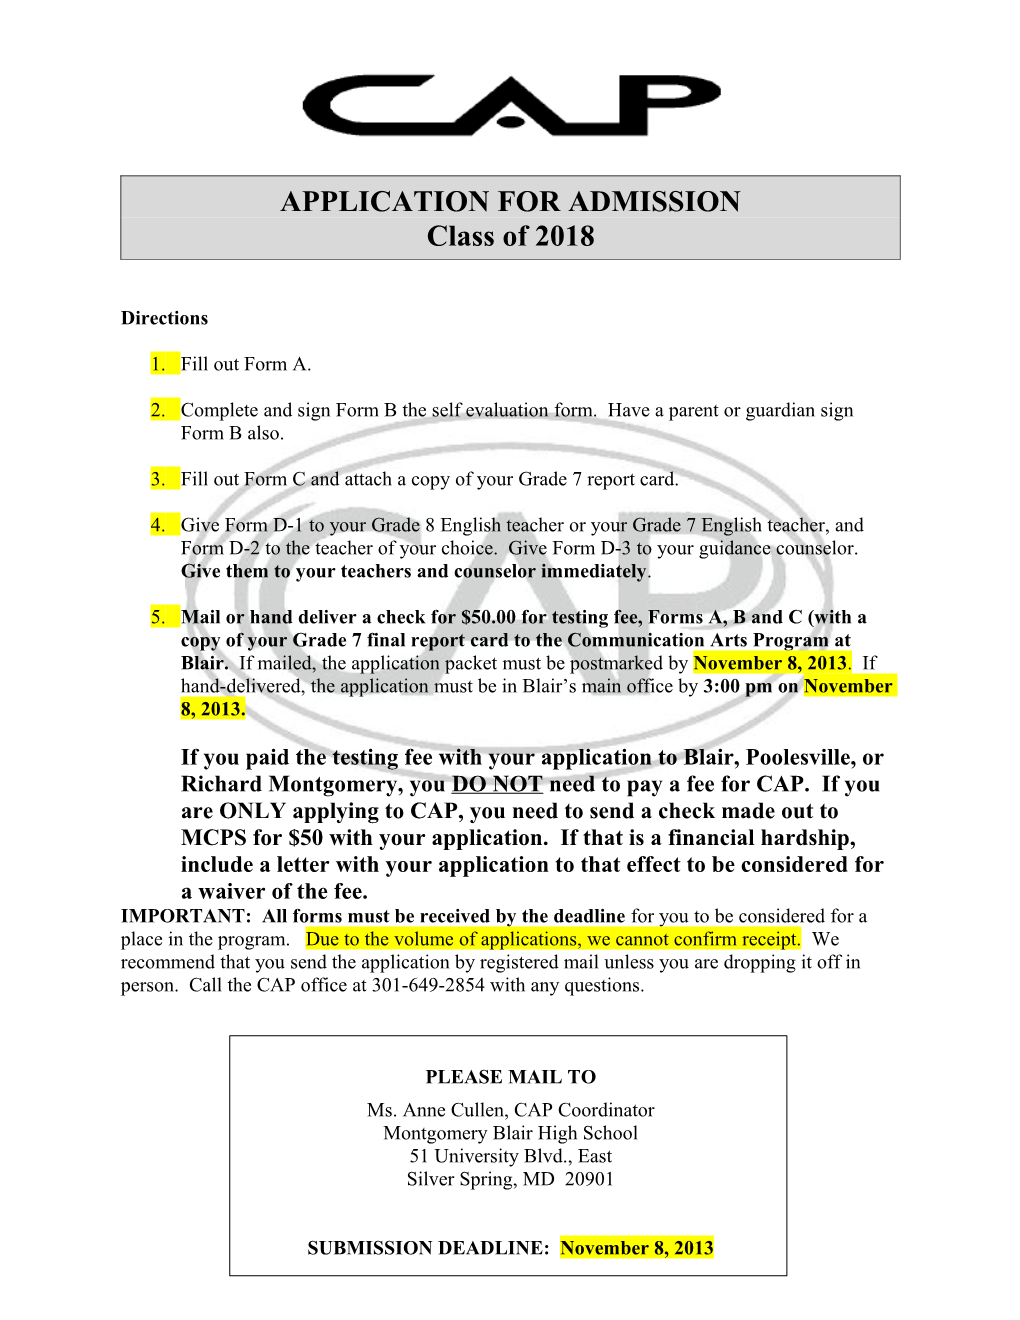 Application for Admission s12